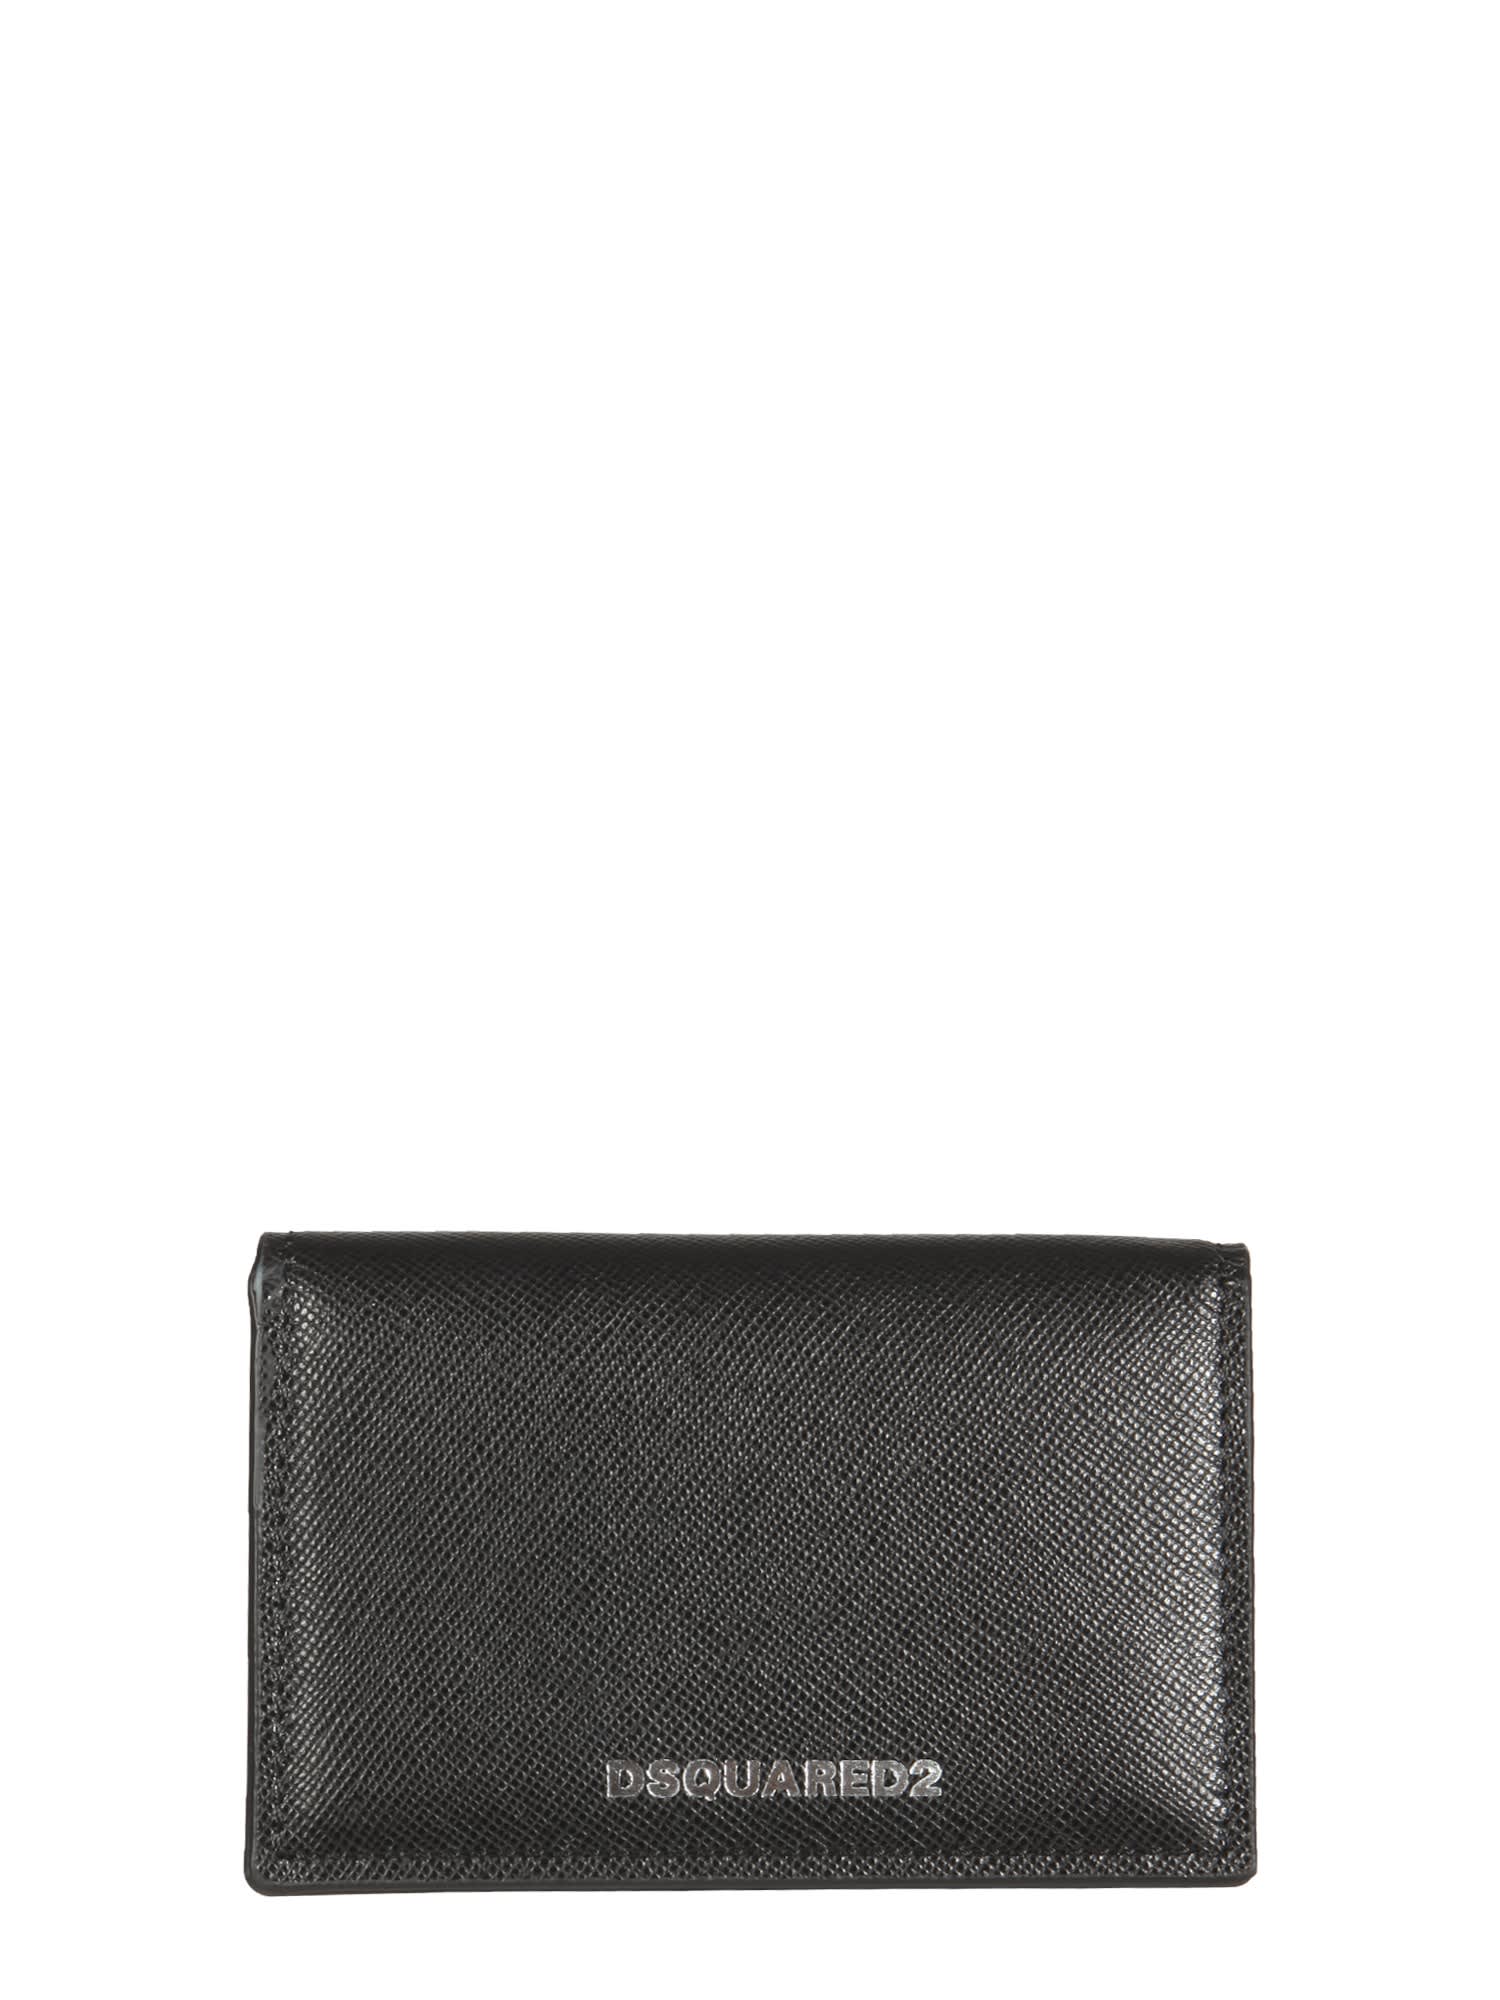 DSQUARED2 LEATHER CARD HOLDER,WAM0012 015012092124